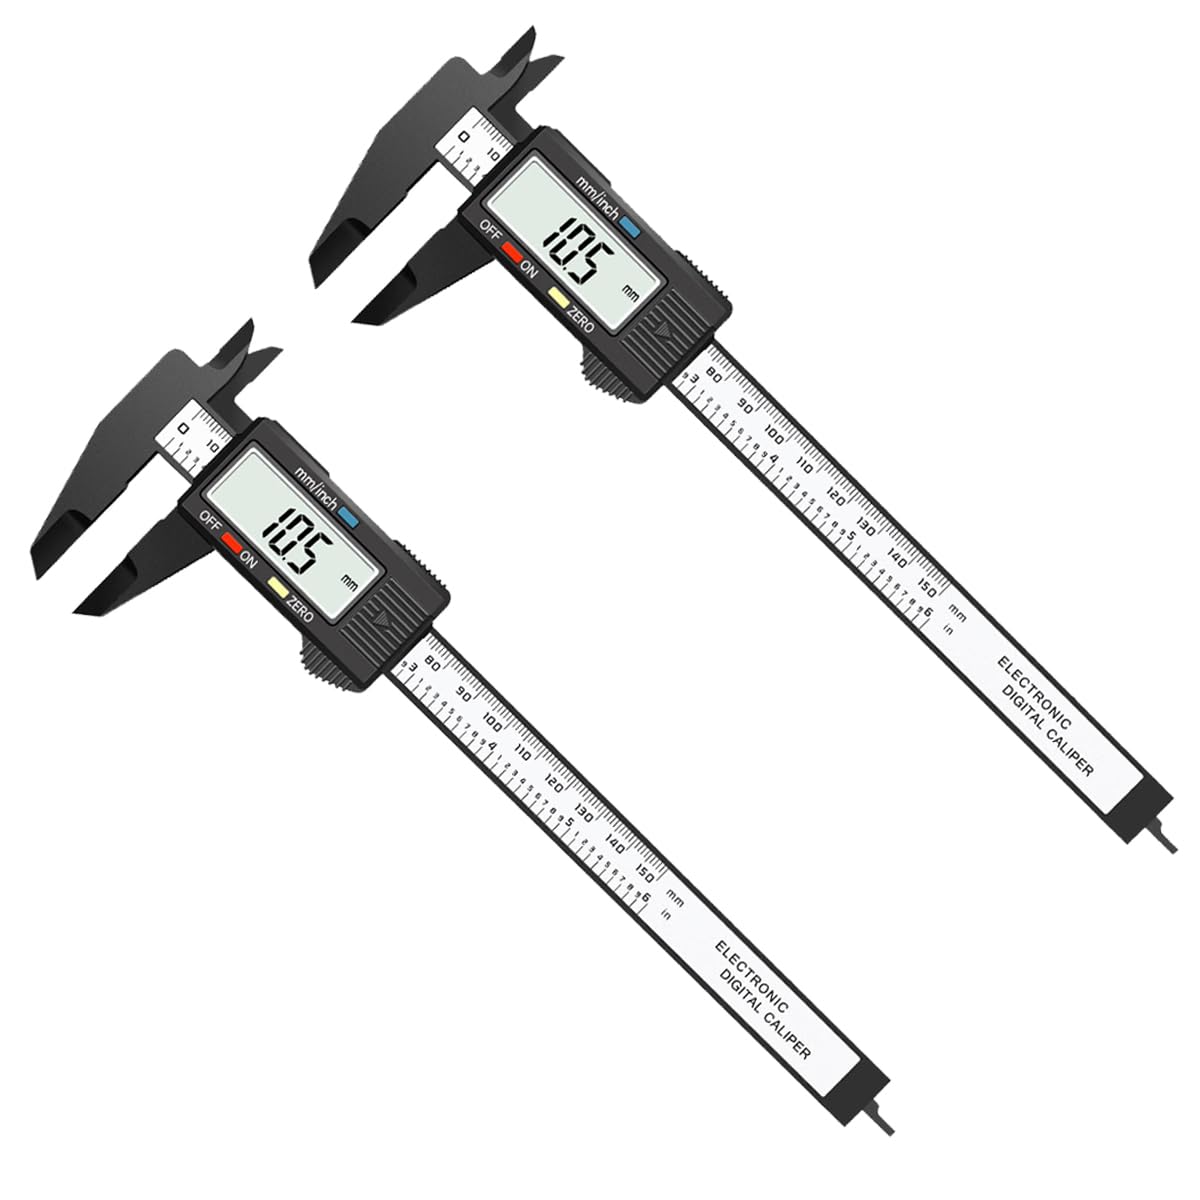 2 Pack Digital Caliper, 0-6 Electronic Digital Calipers with Large LCD Screen, Automatic Shutdown Function, Inch and Millimeter Conversion